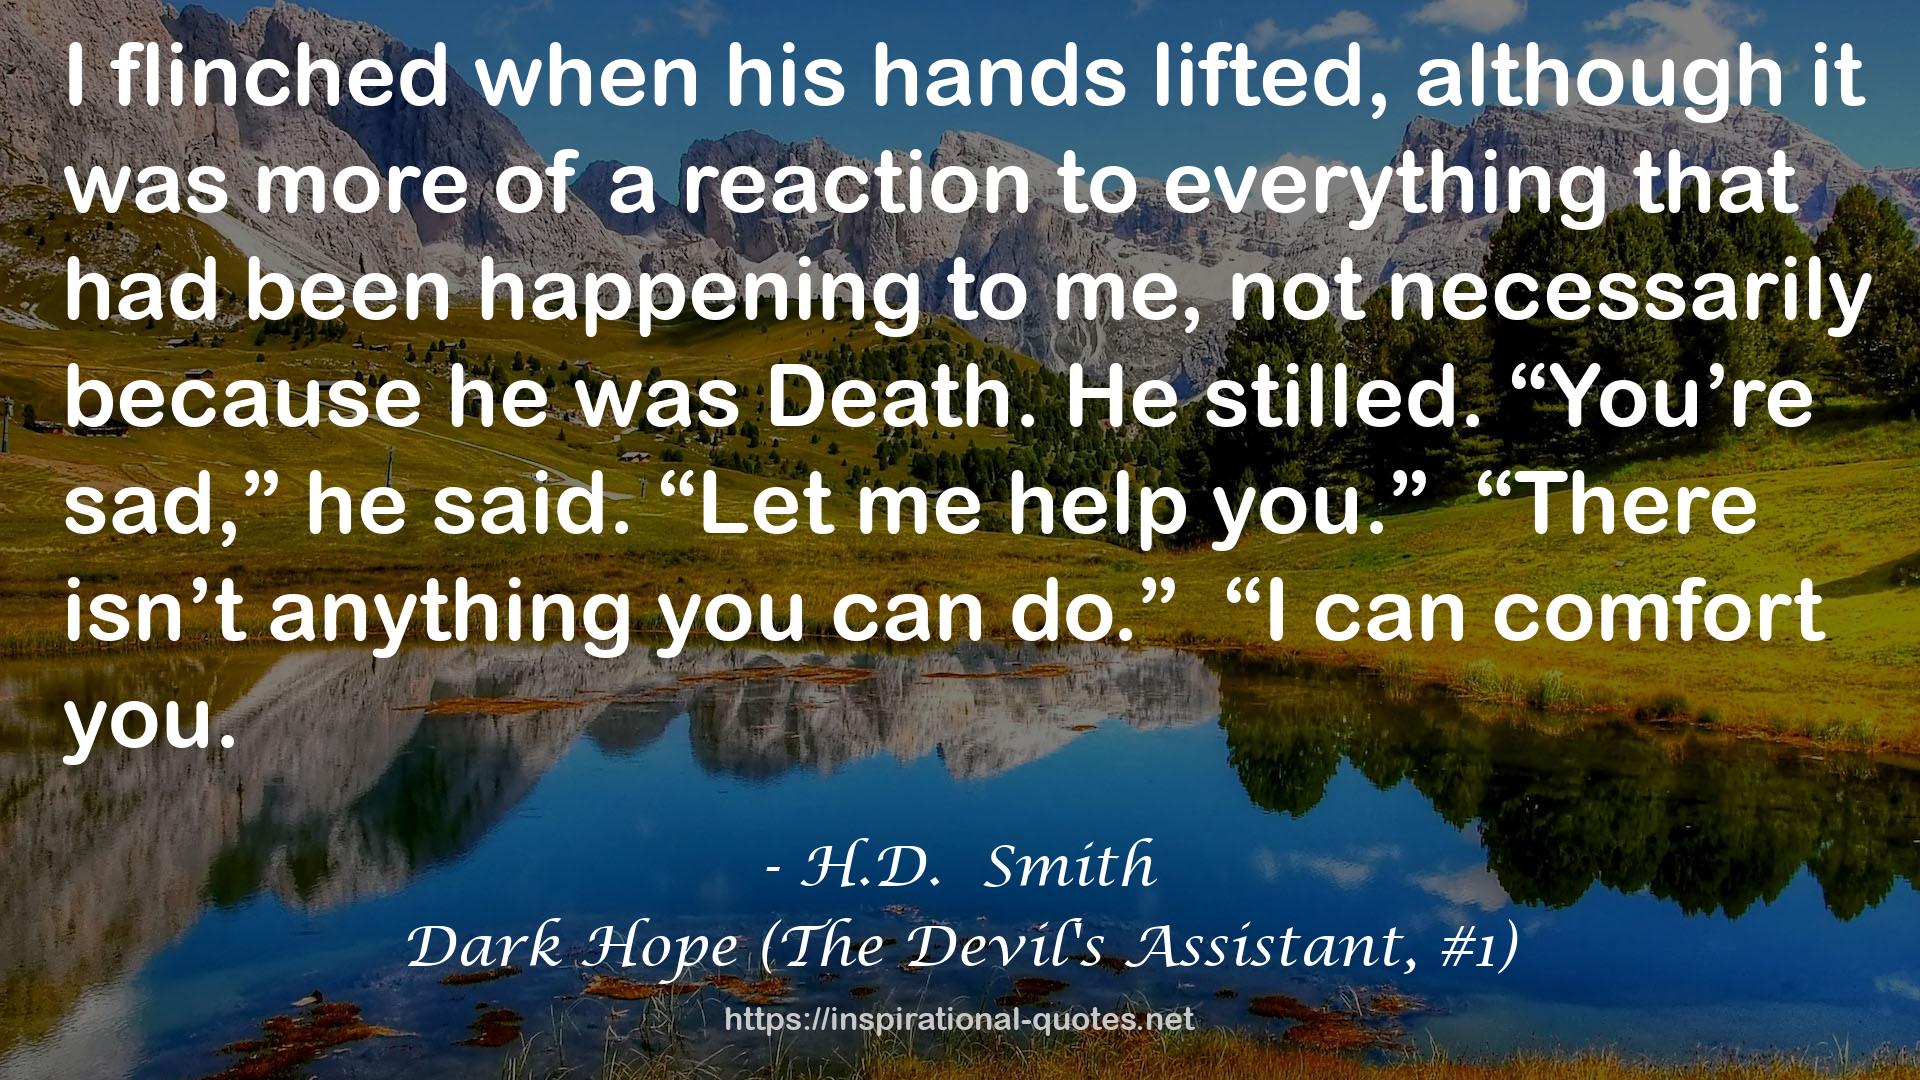 Dark Hope (The Devil's Assistant, #1) QUOTES